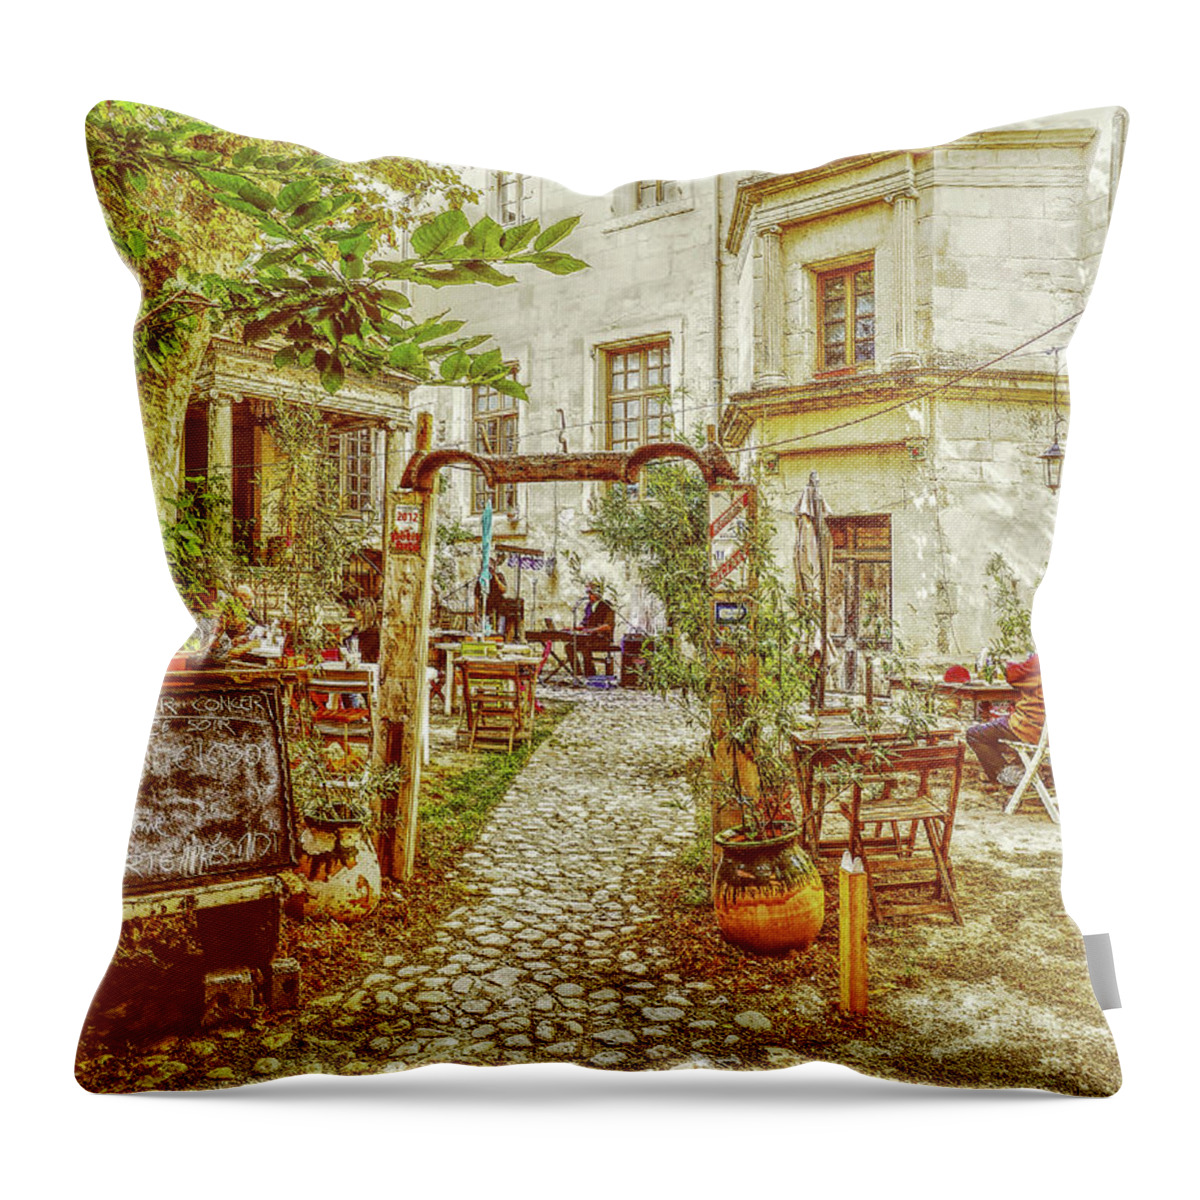 Cafe Throw Pillow featuring the photograph Narbone Cafe 2 by Bearj B Photo Art